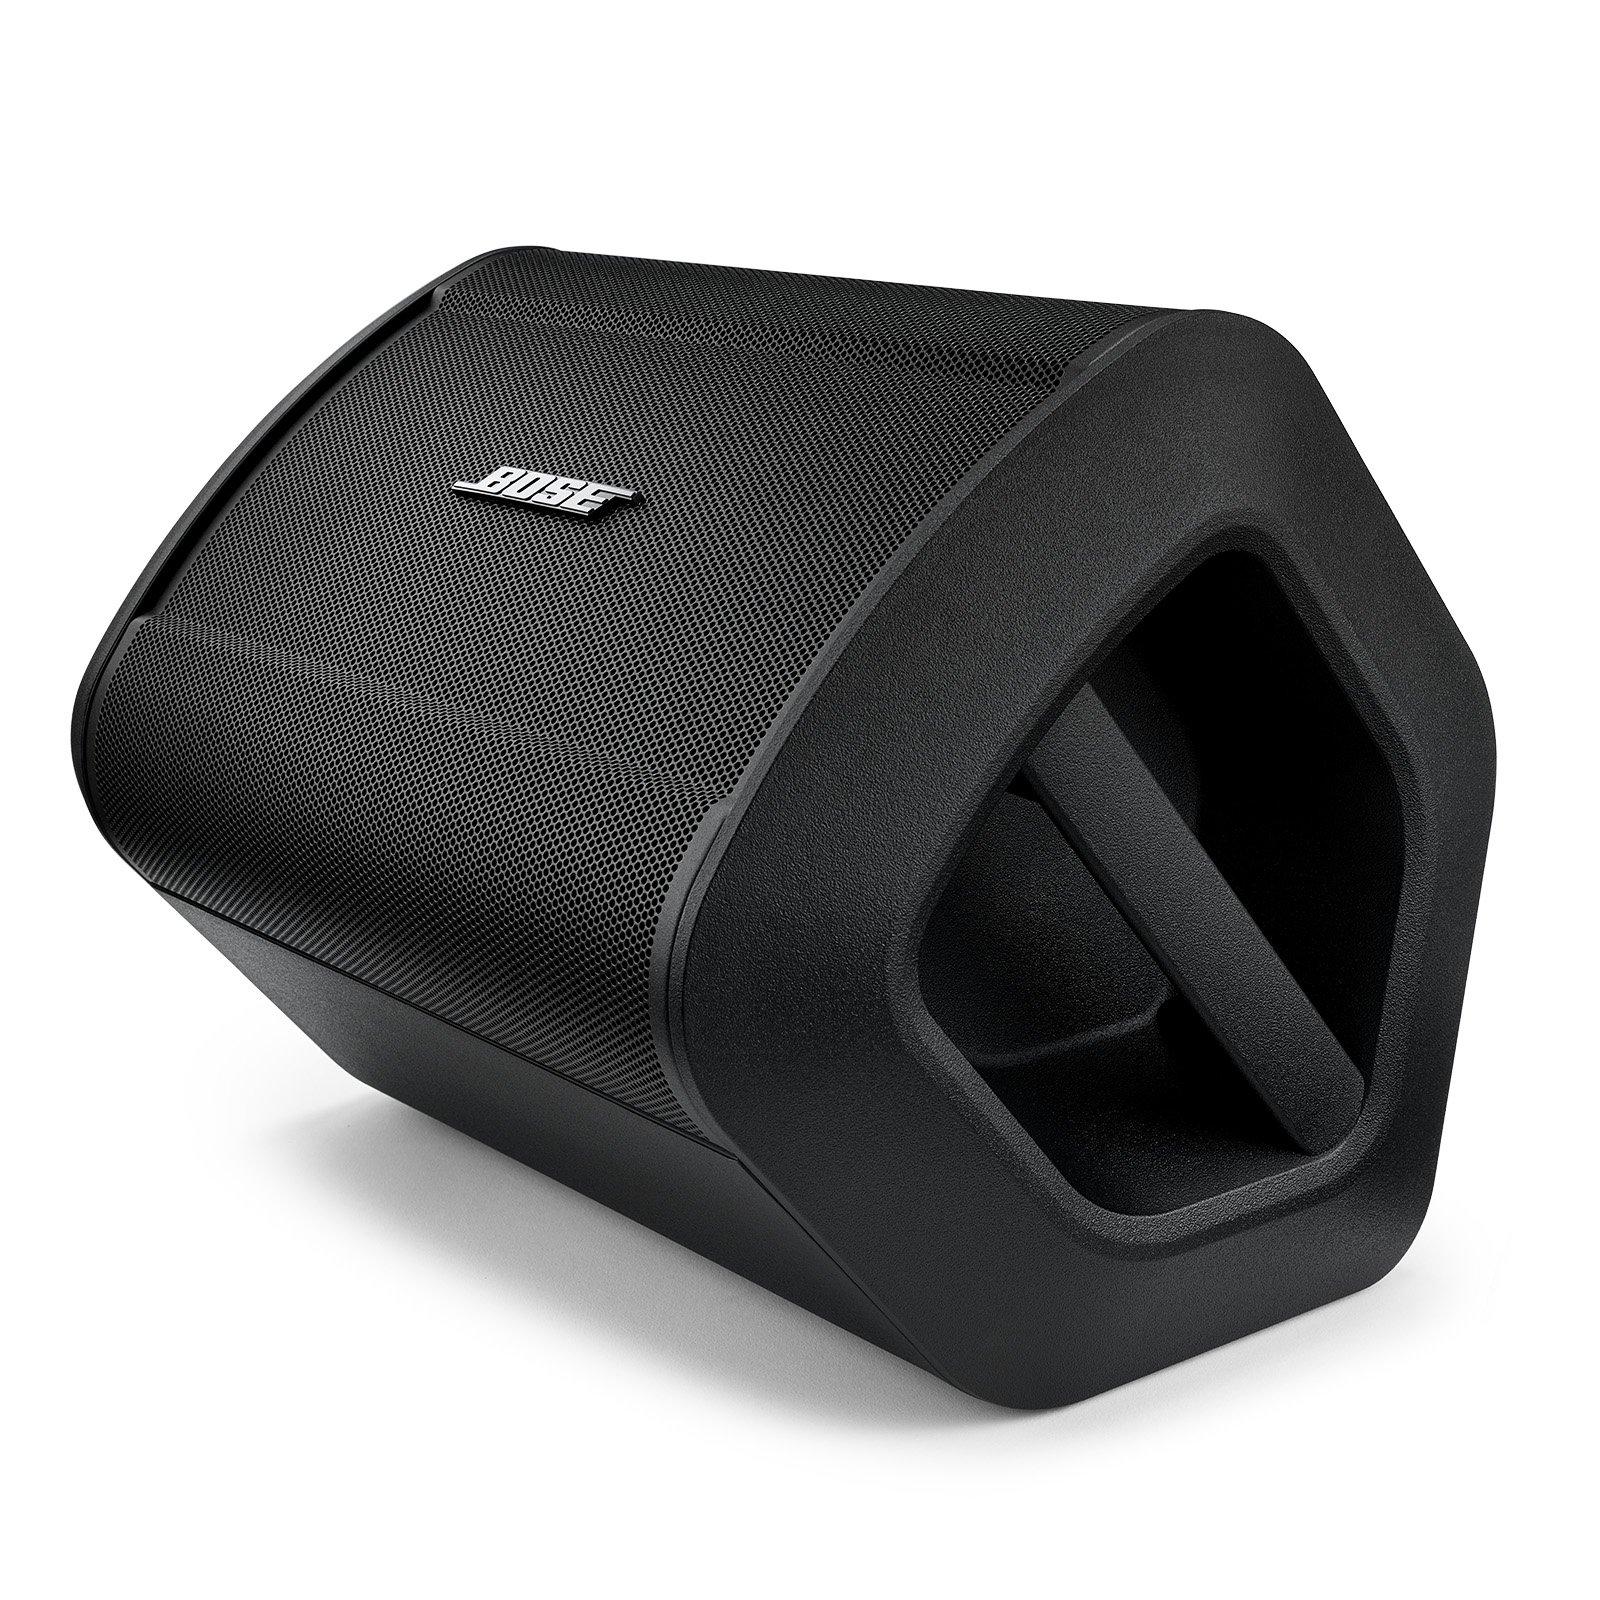 Bose - Bose S1 Pro+ All-in-one Powered Portable Bluetooth Speaker Wireless PA System 230V (UK), Black